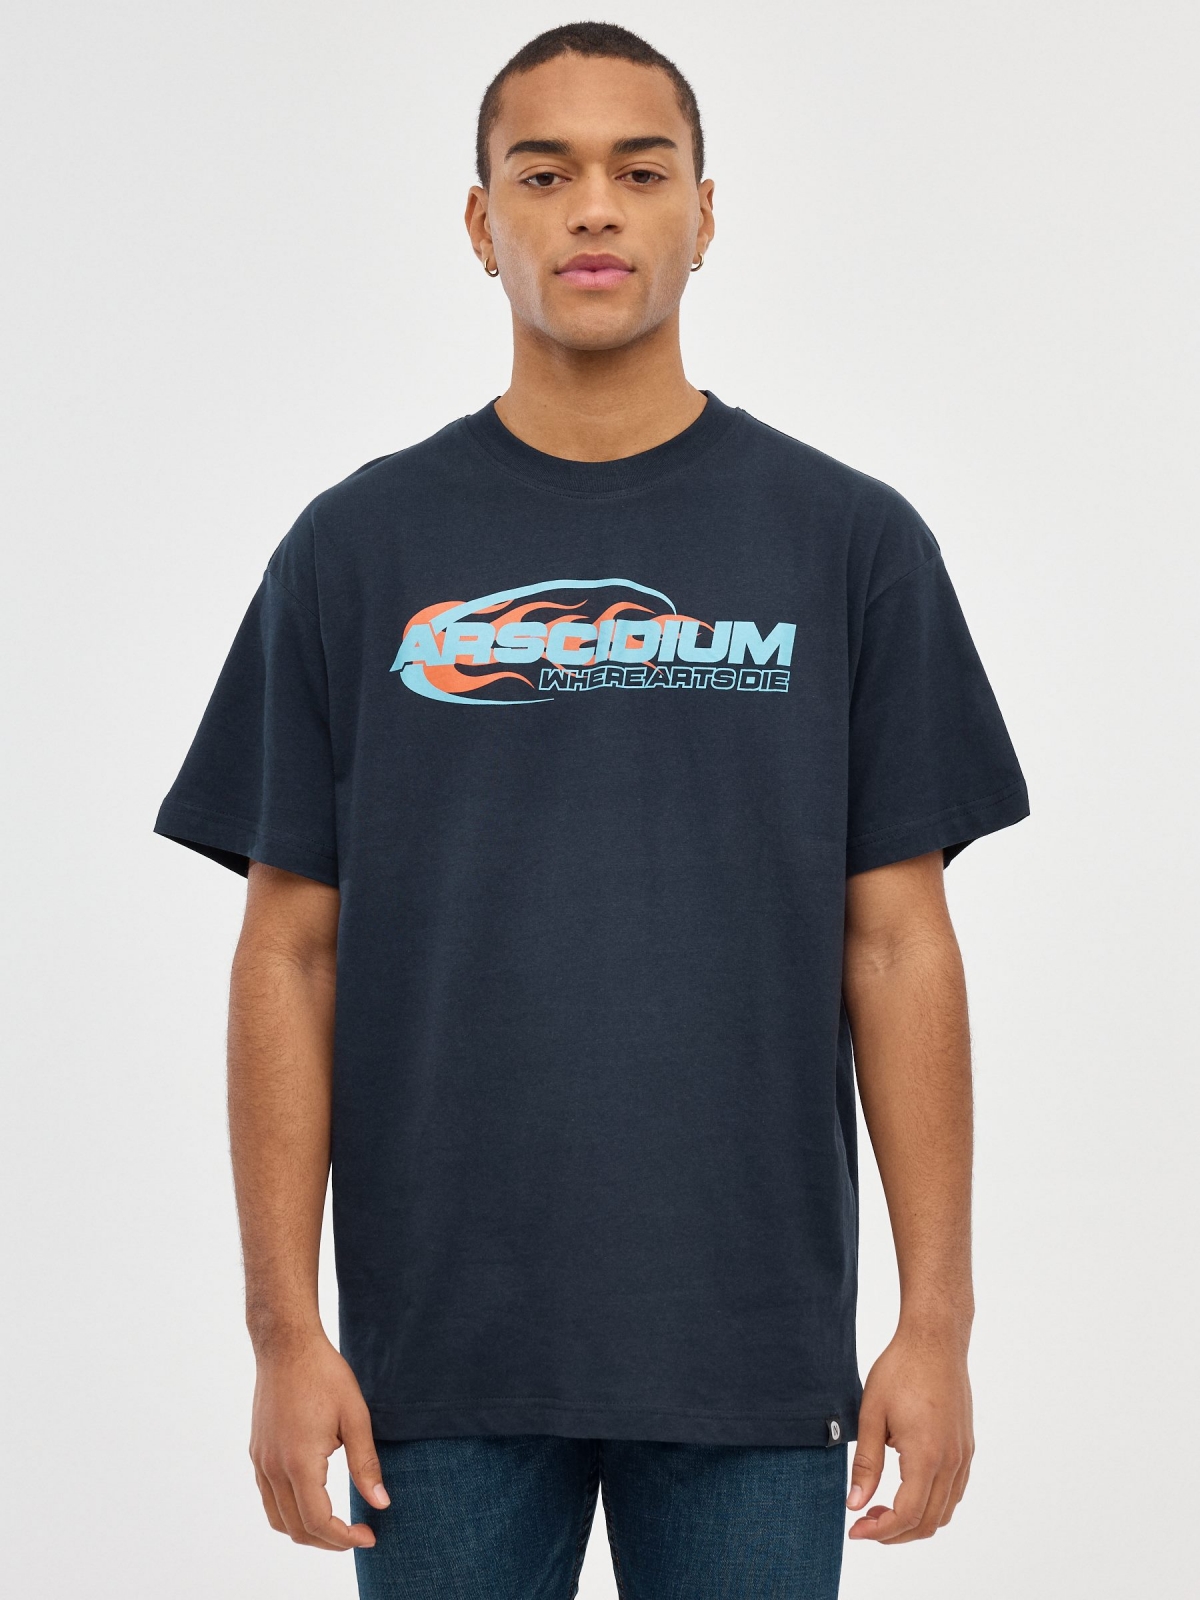 T-shirt Arscidium navy middle front view